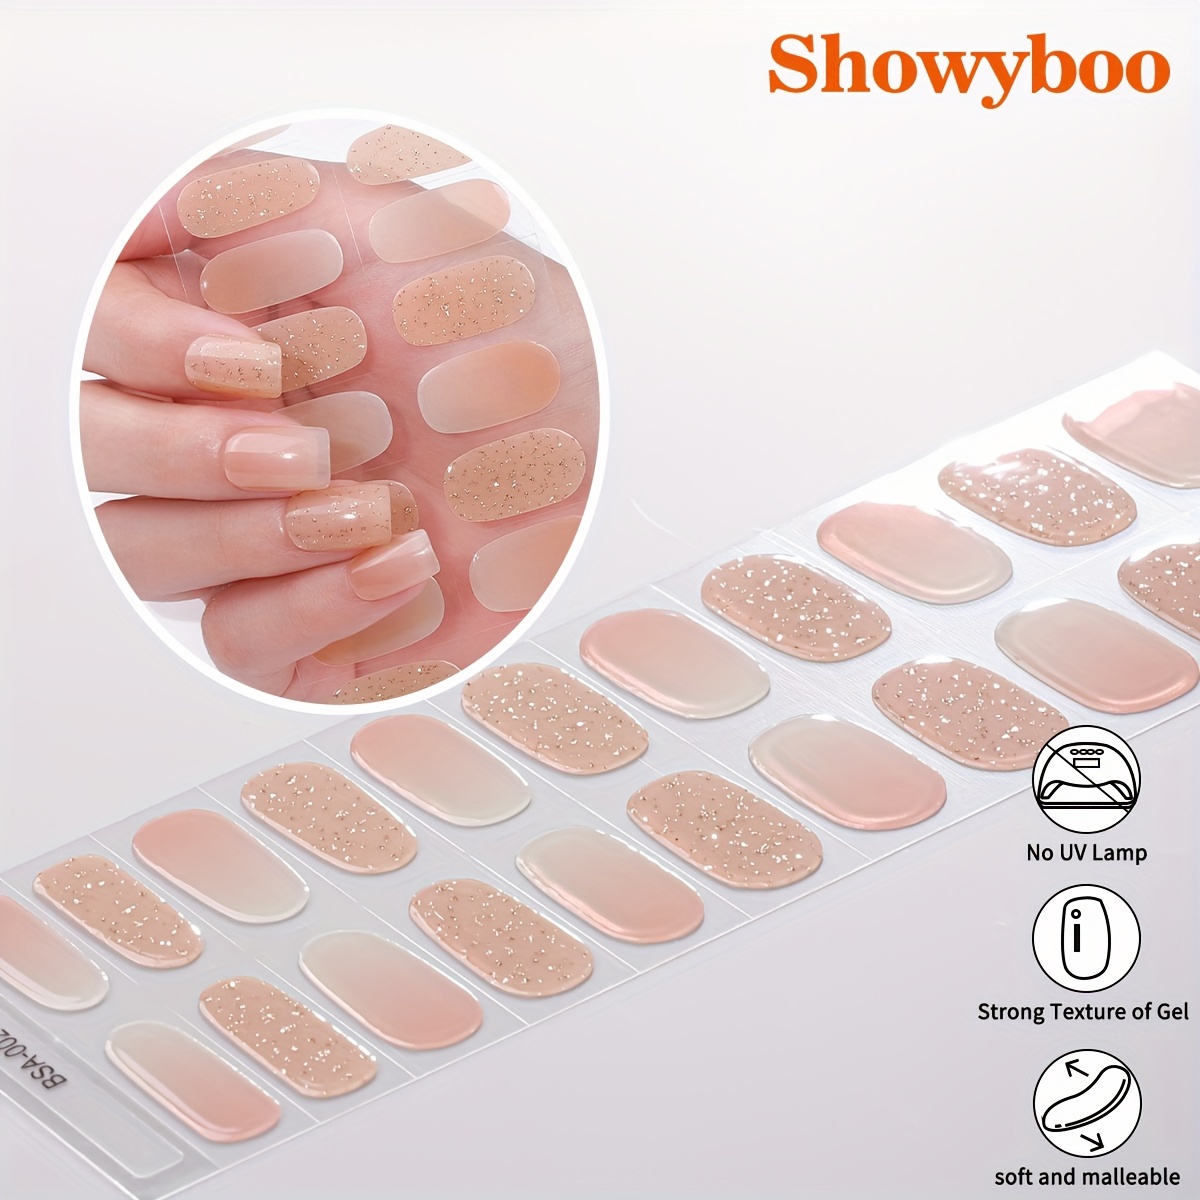 

Easy Apply 22pc Apricot Glitter Gel Nail Wraps - Self-adhesive, No Bake Needed, Includes Nail File